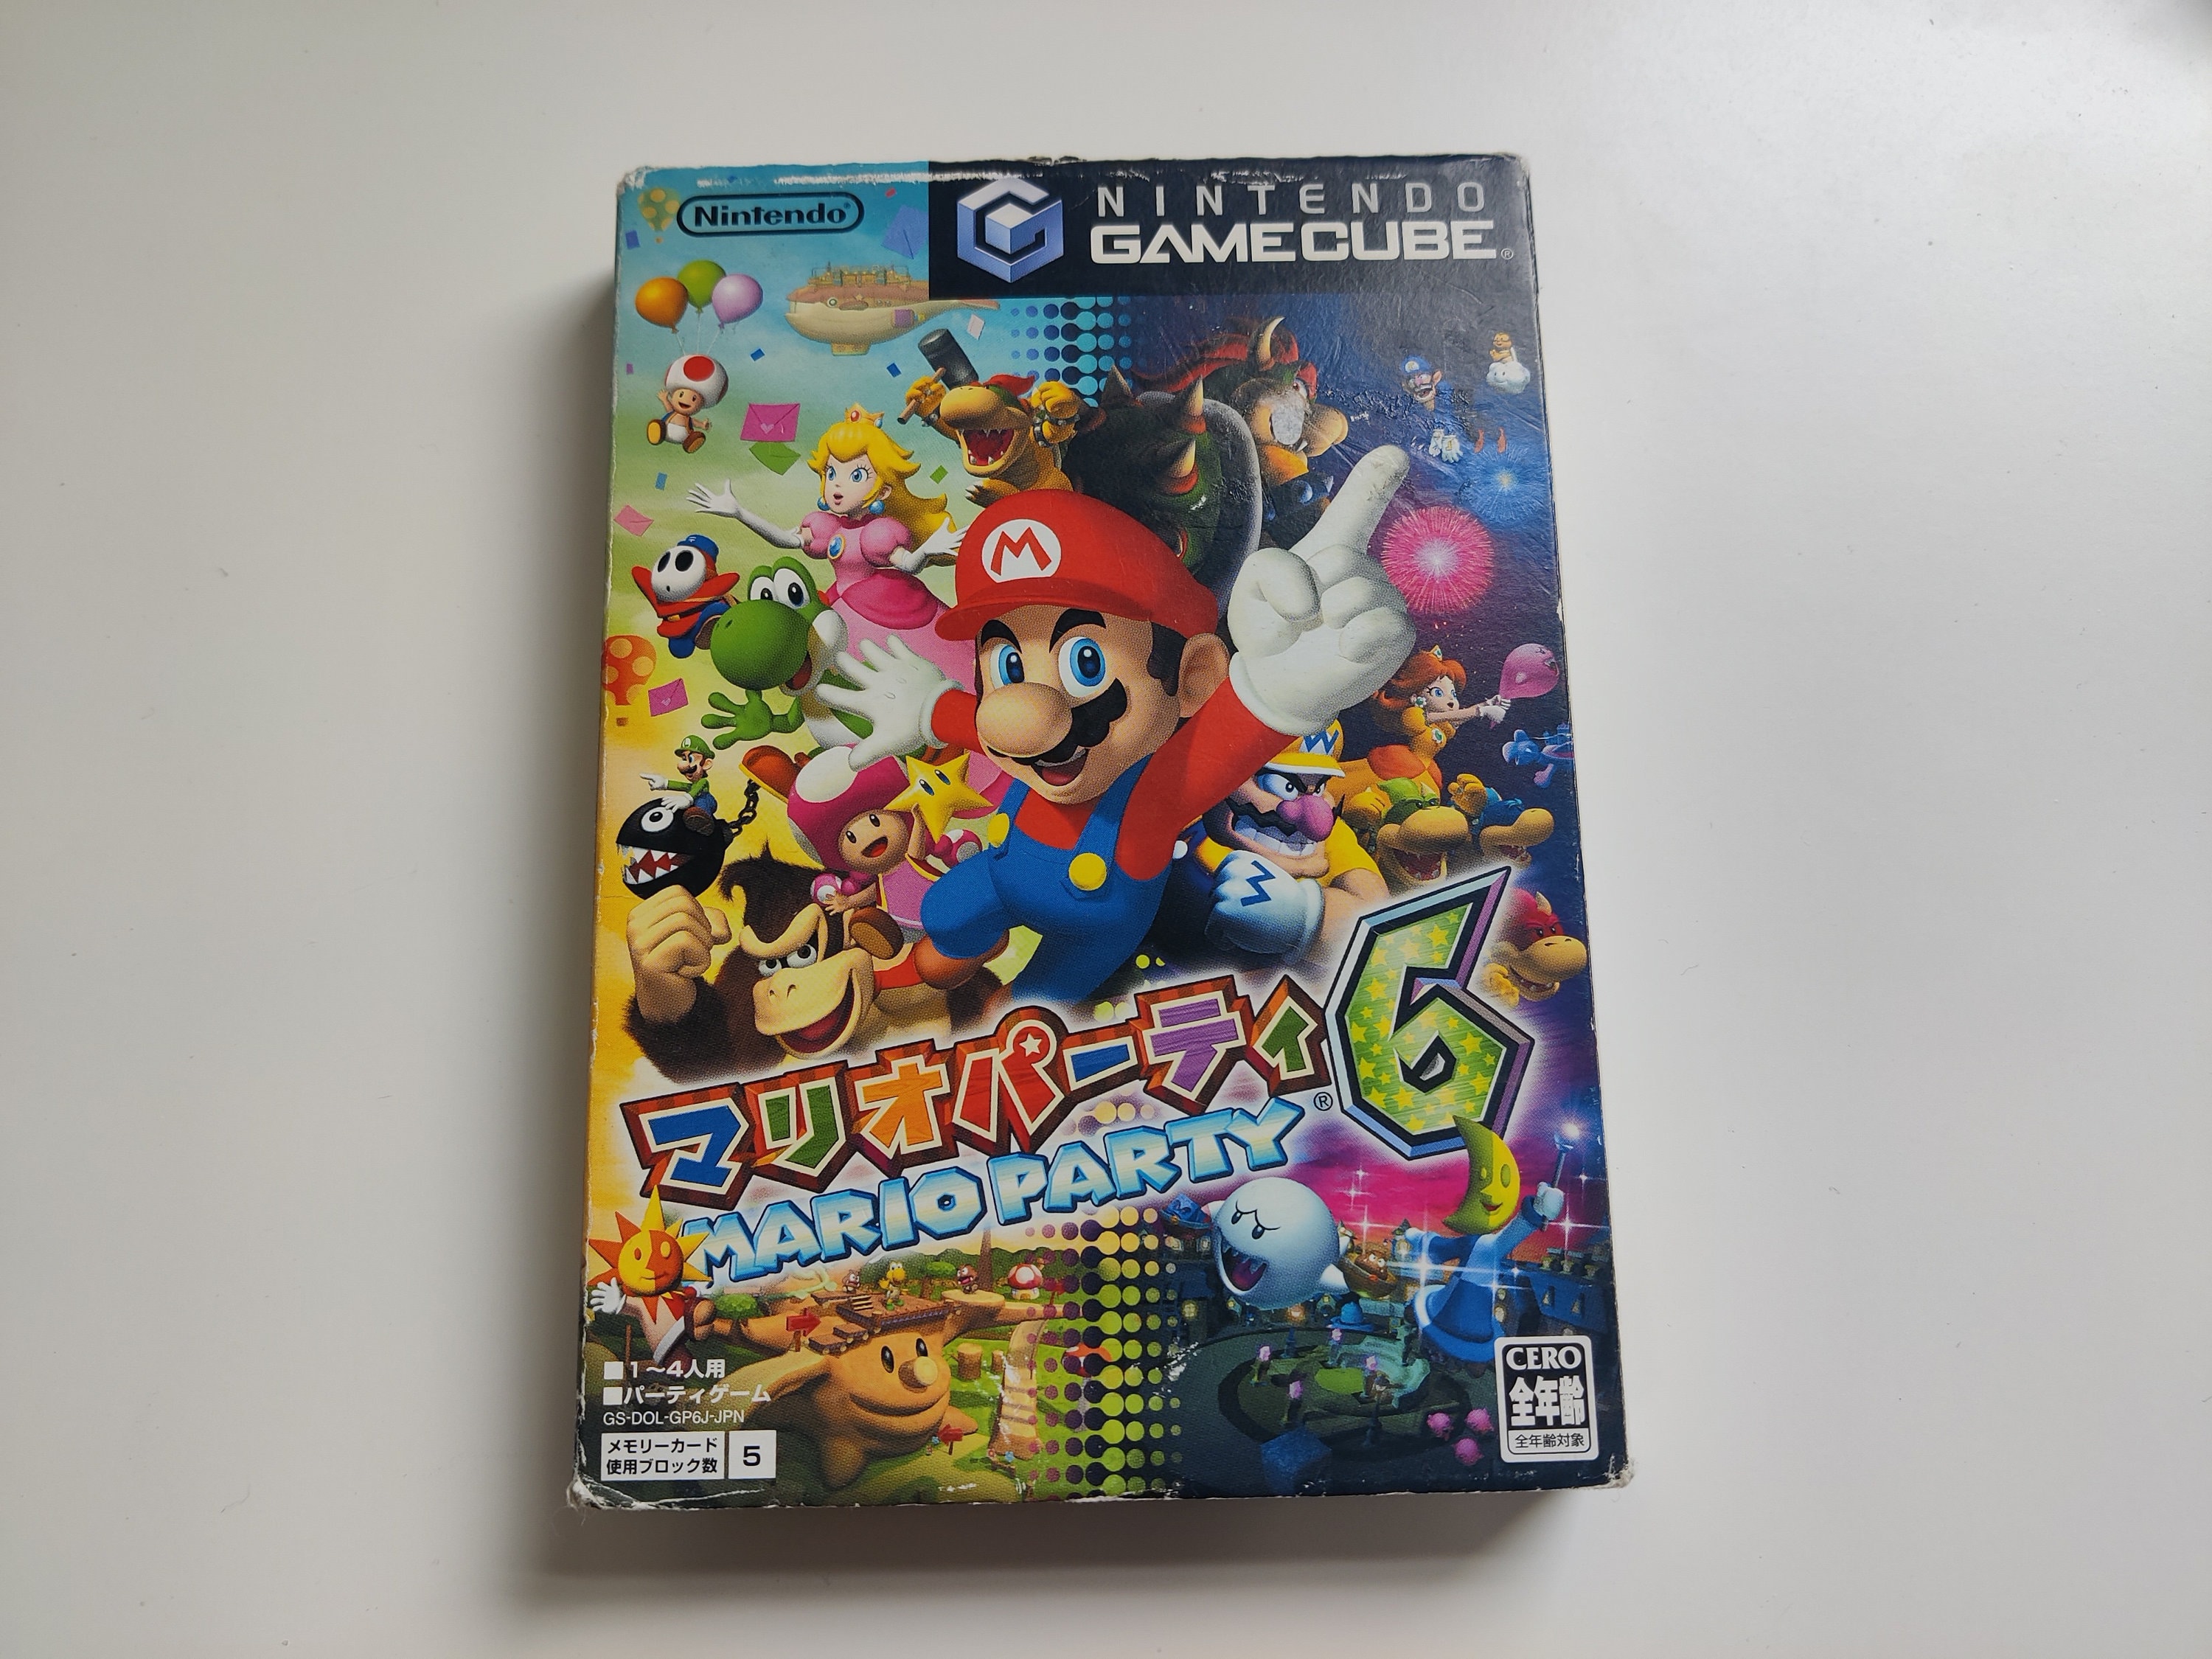 Mario Party 4 5 6 7 set Nintendo Gamecube Japan version Tested & Works well